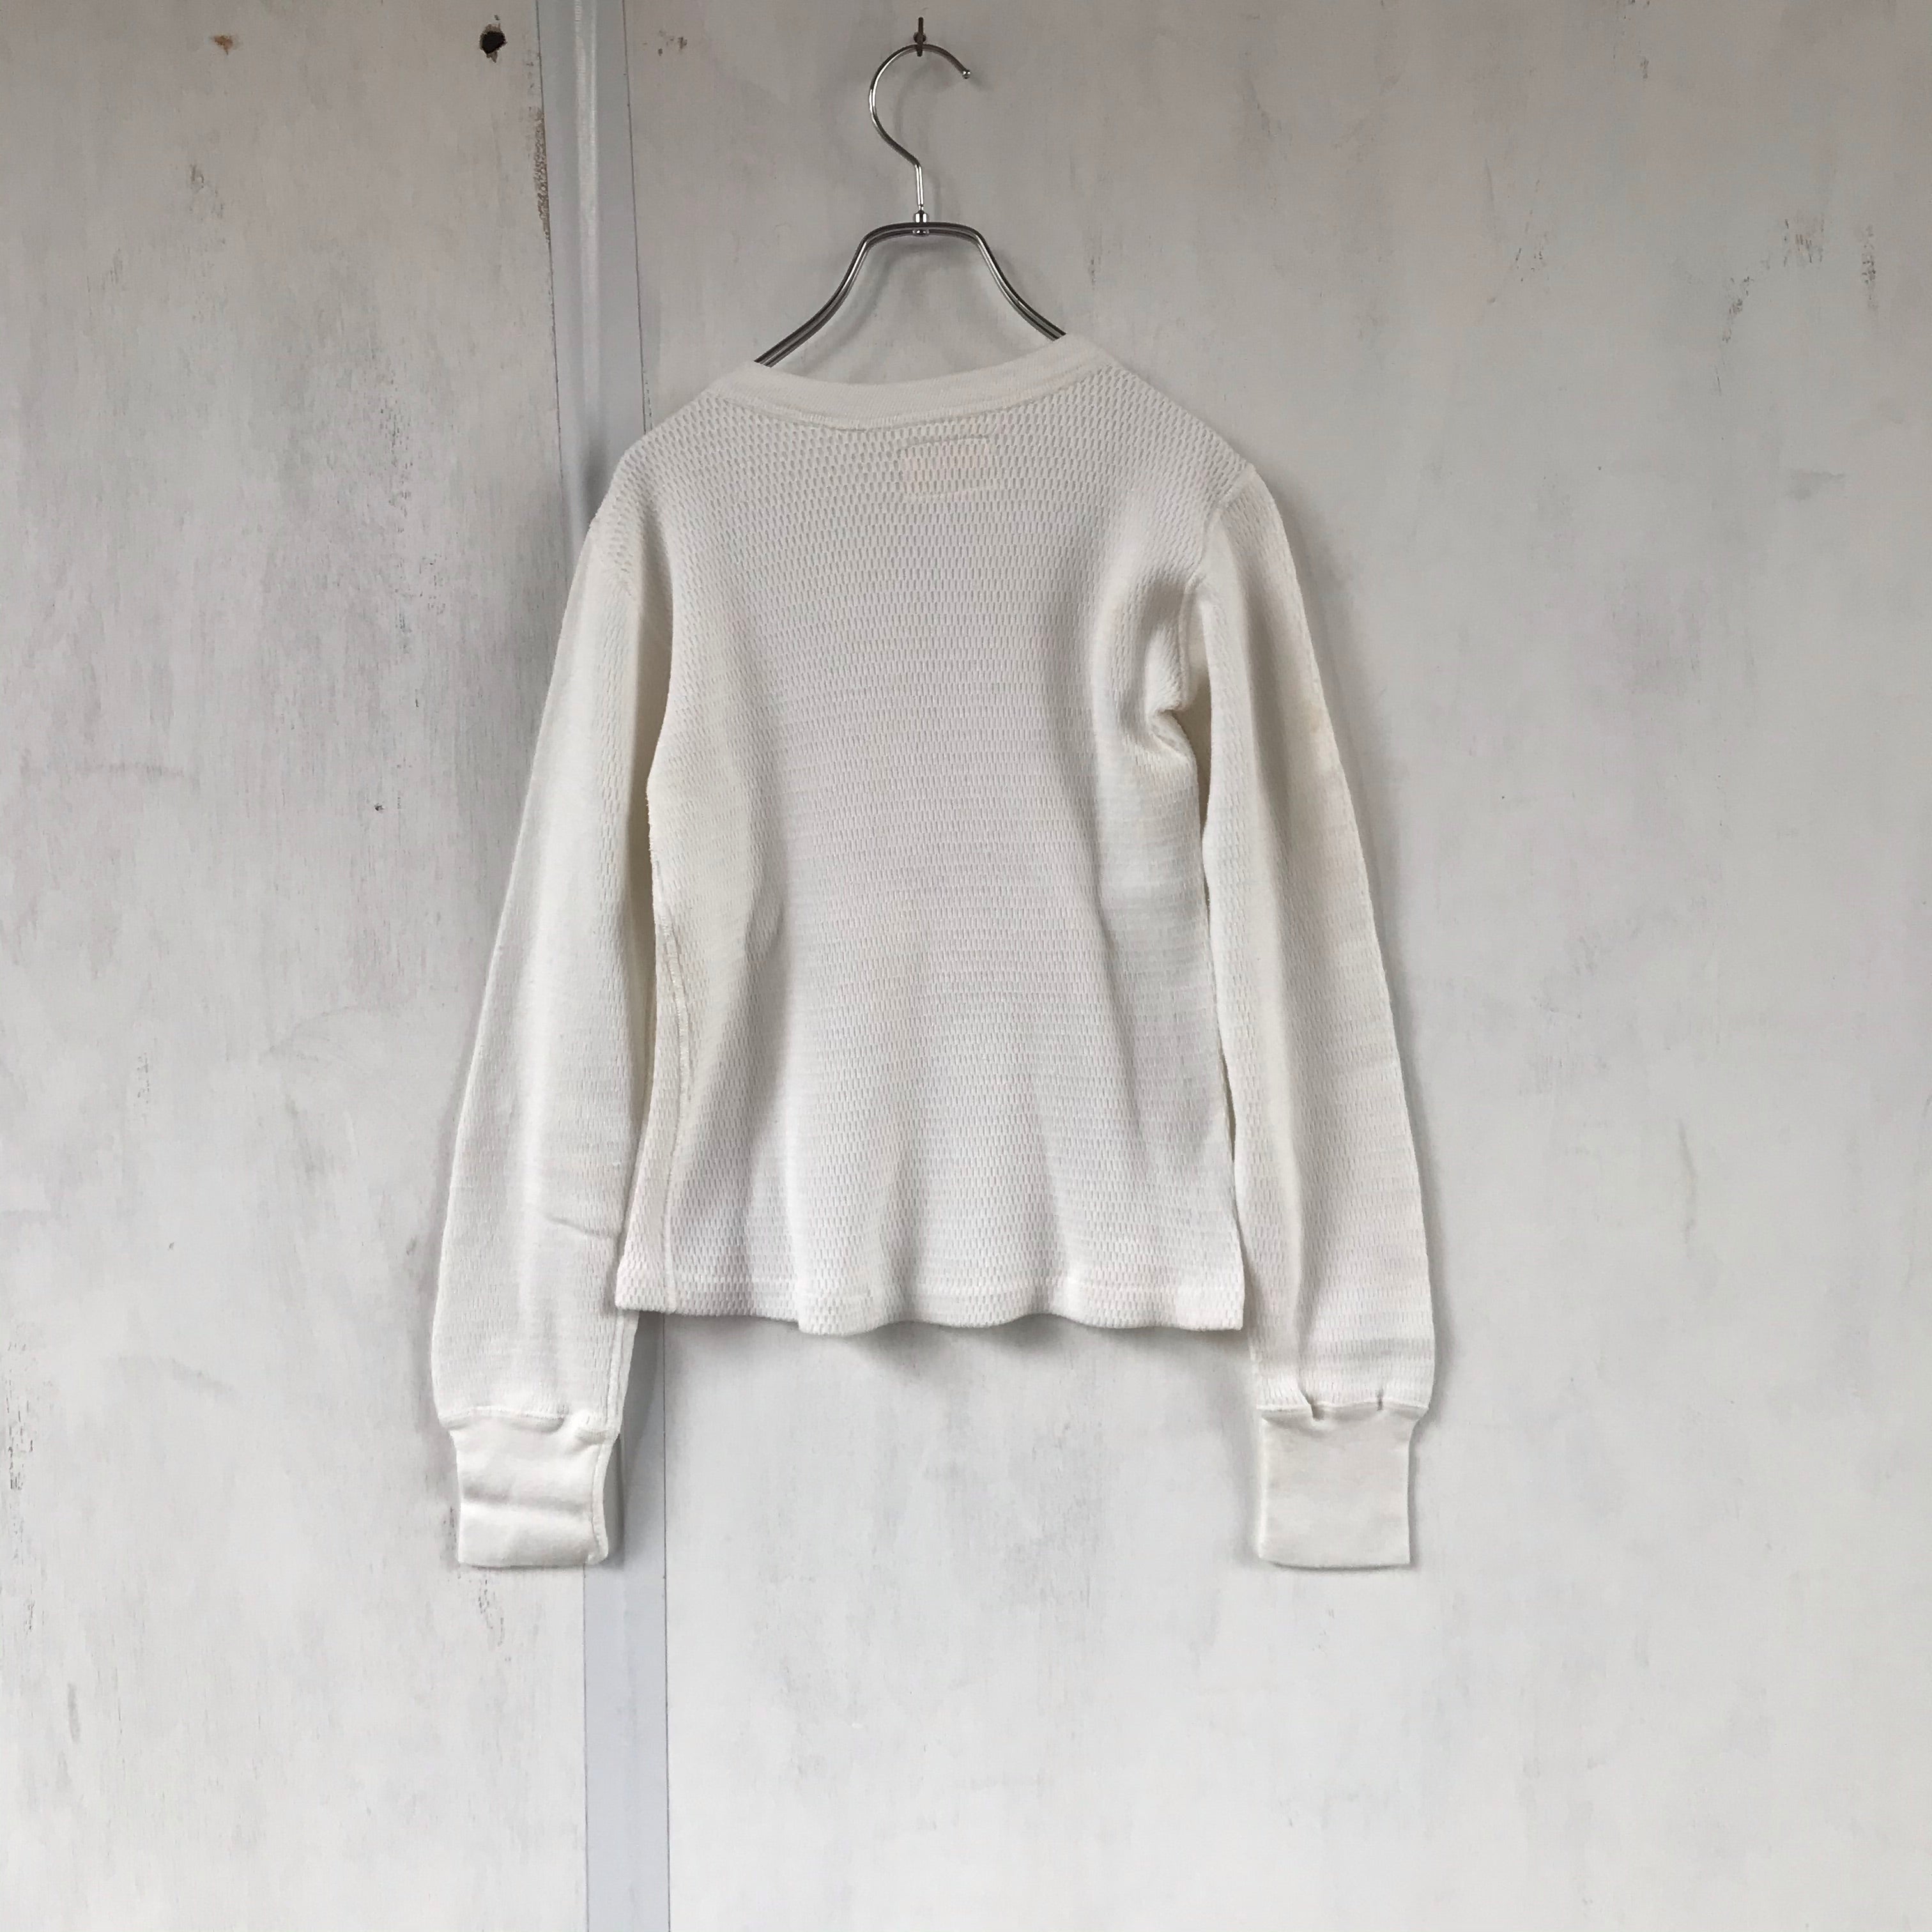 [ ONLY ONE ! ] U.S. LONG SLEEVE THERMAL UNDERSHIRT  / Mr.Clean Select